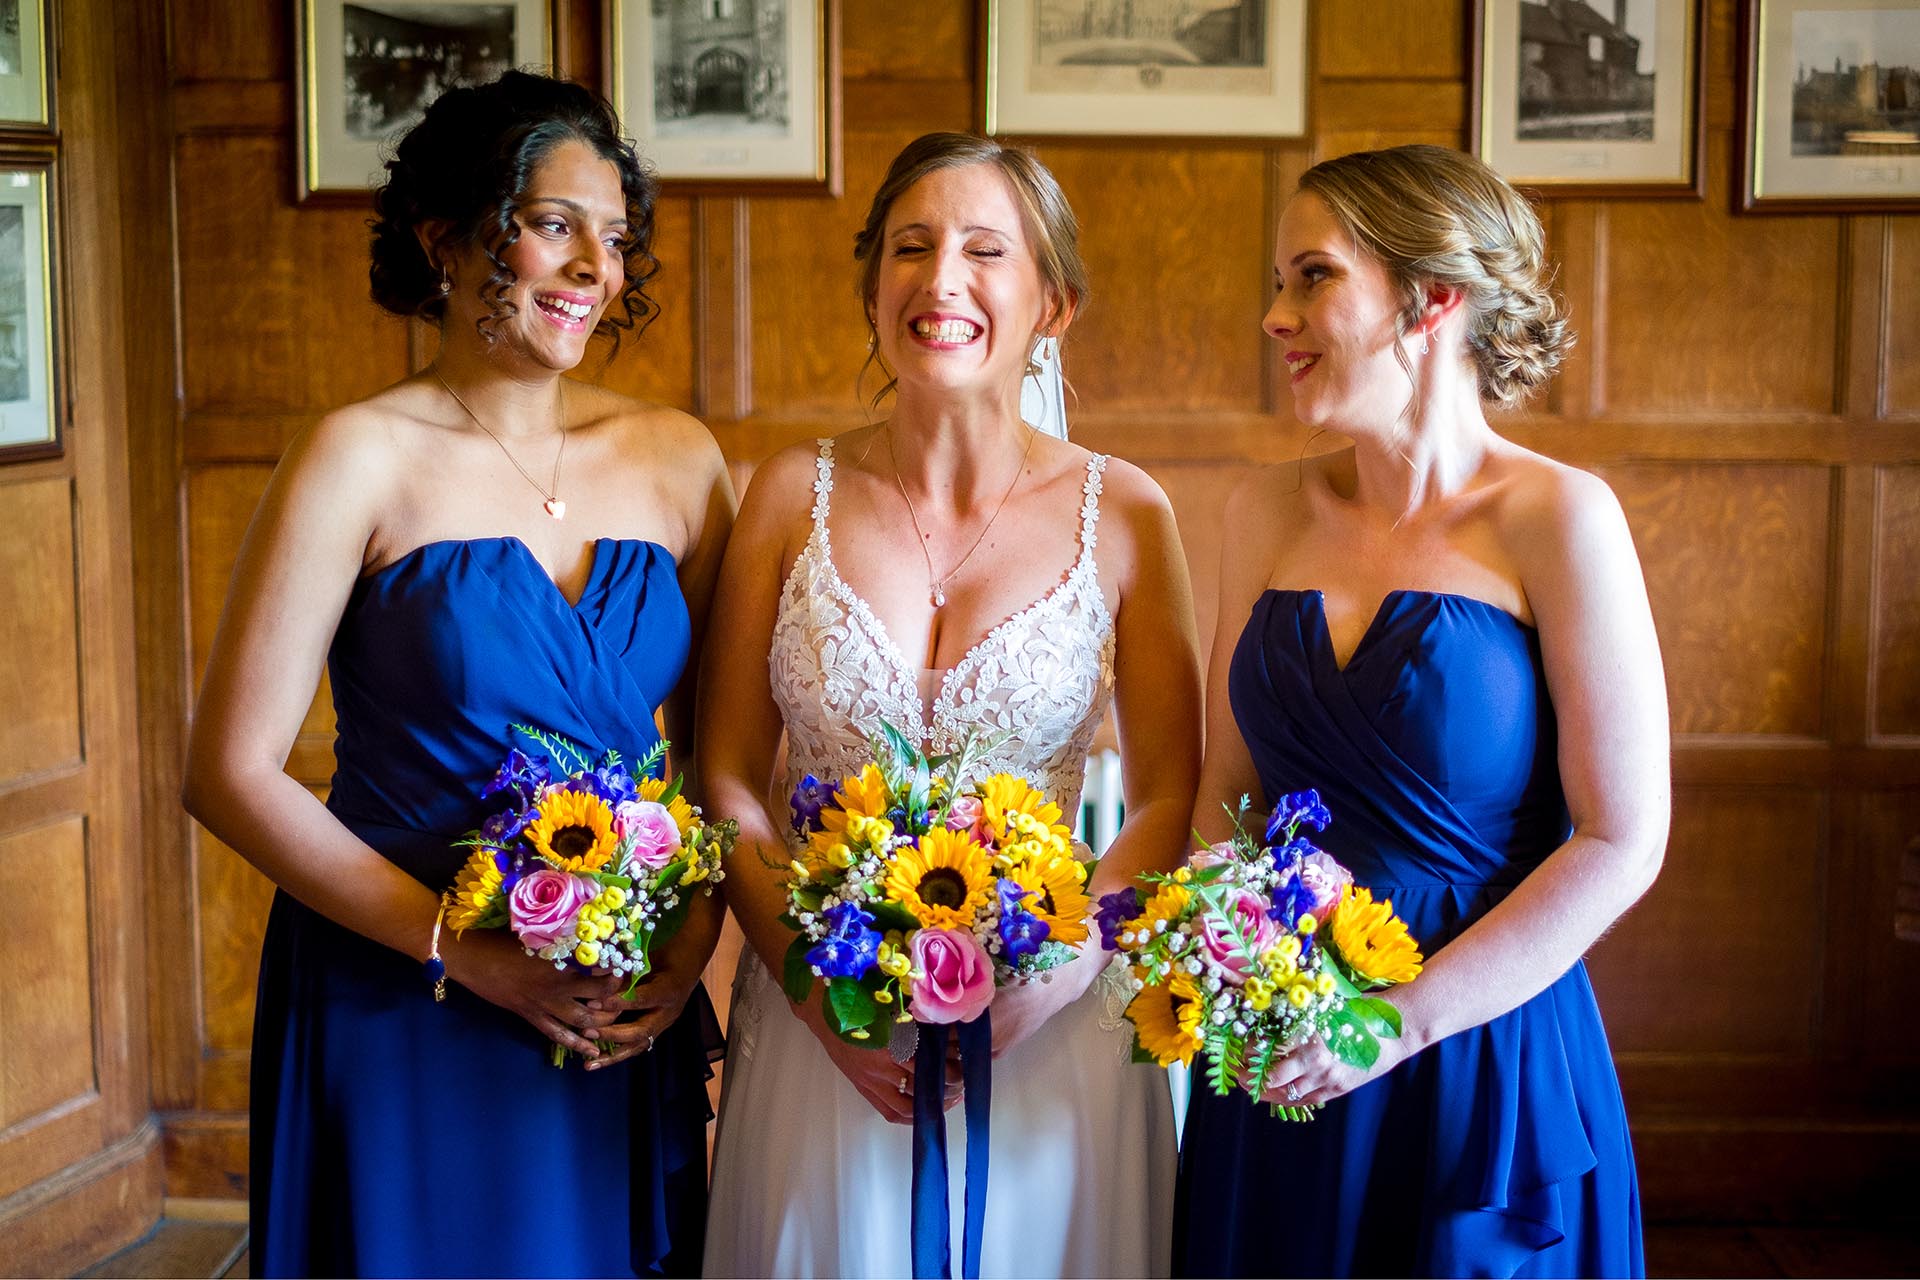 Bride and bridesmaids before the wedding ceremony at Leez Priory, Great Leighs, Chelmsford by Essex wedding photographer